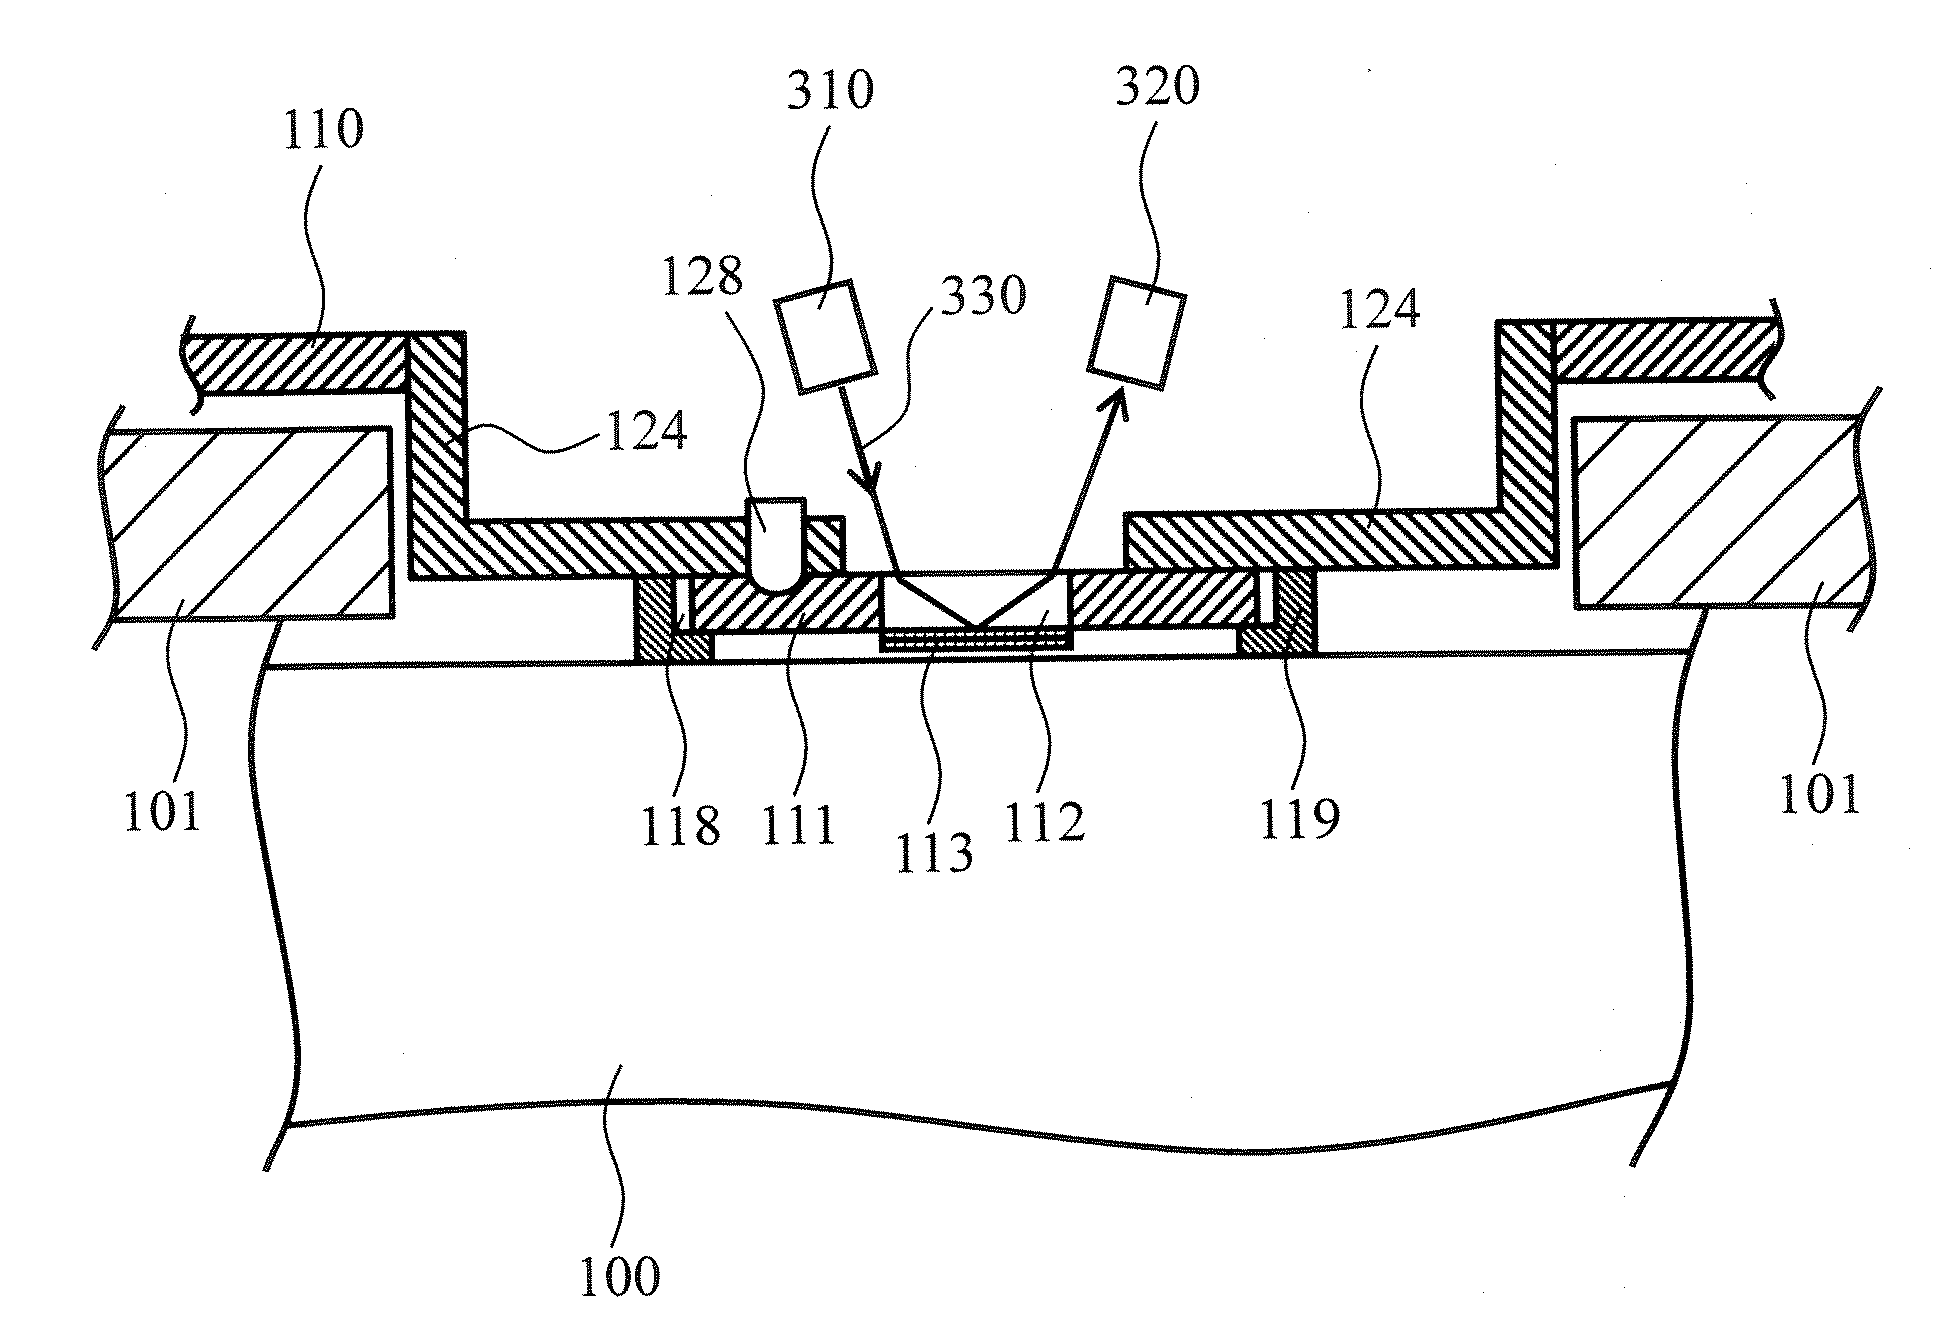 Biological component measuring apparatus and method